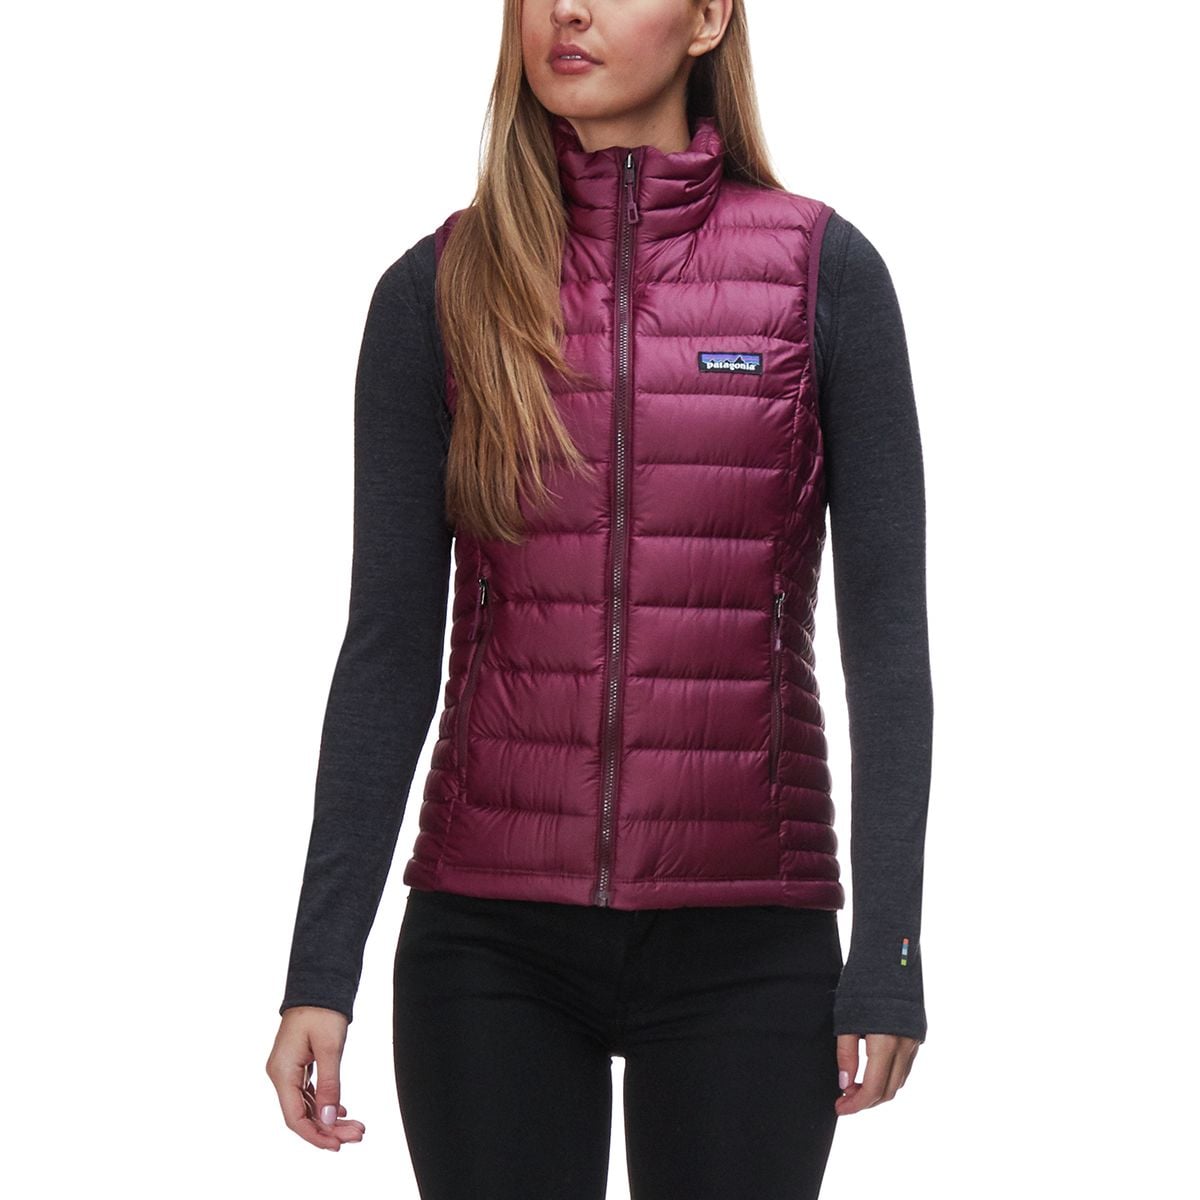 Patagonia Down Sweater Vest - Women's | Backcountry.com